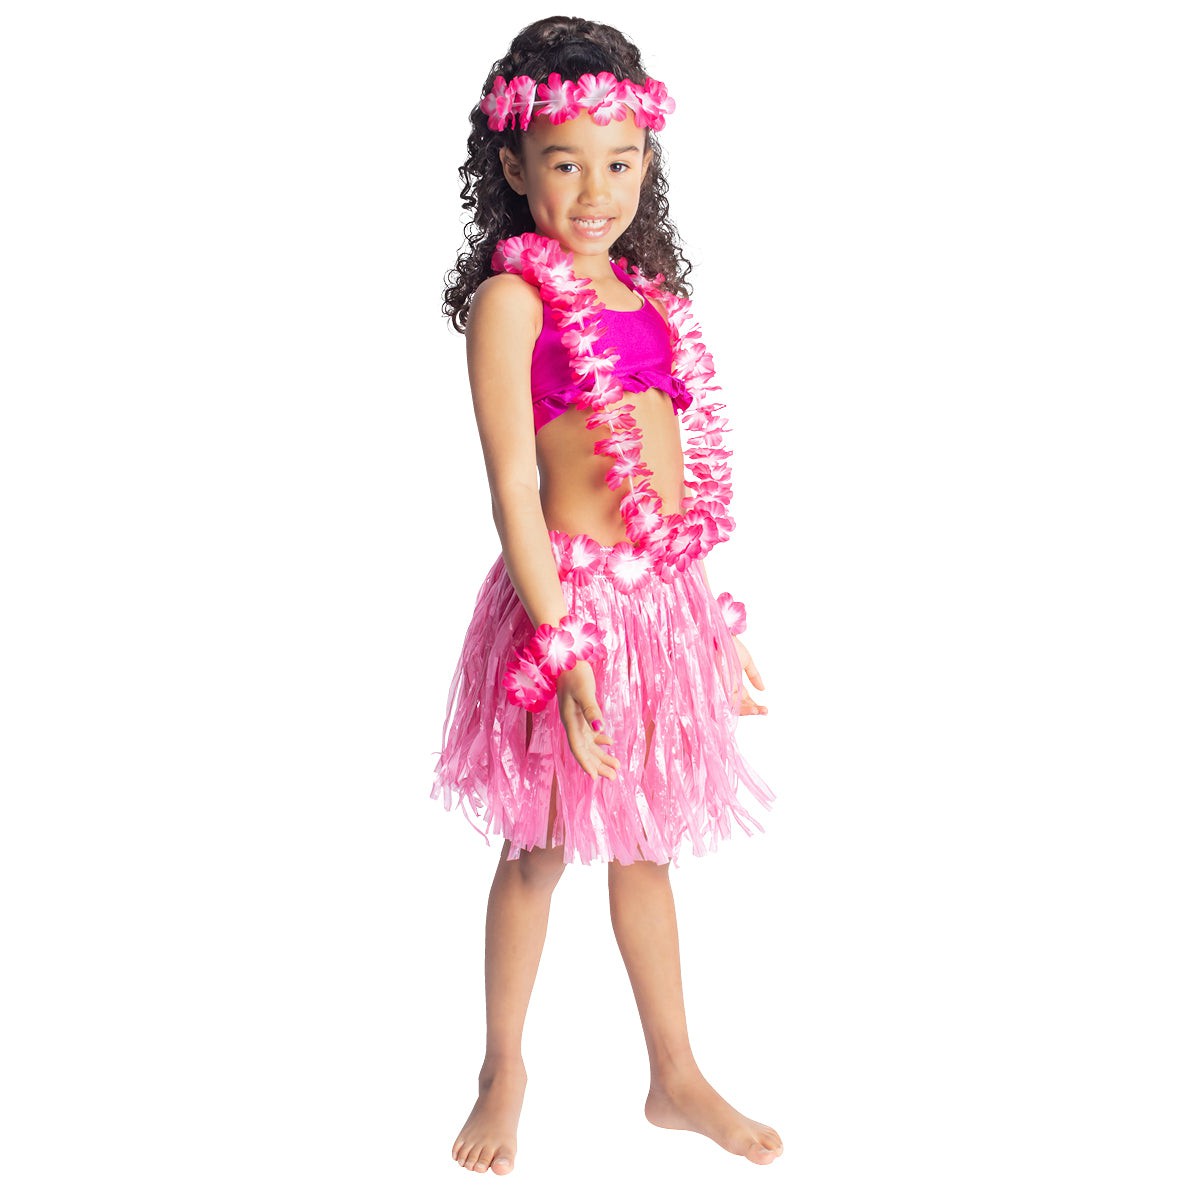 LIANGSHAN DAJIN GIFTS & TOYS CO LTD Theme Party Hula Short Skirt Kit for Kids, 5 Count 810077654323